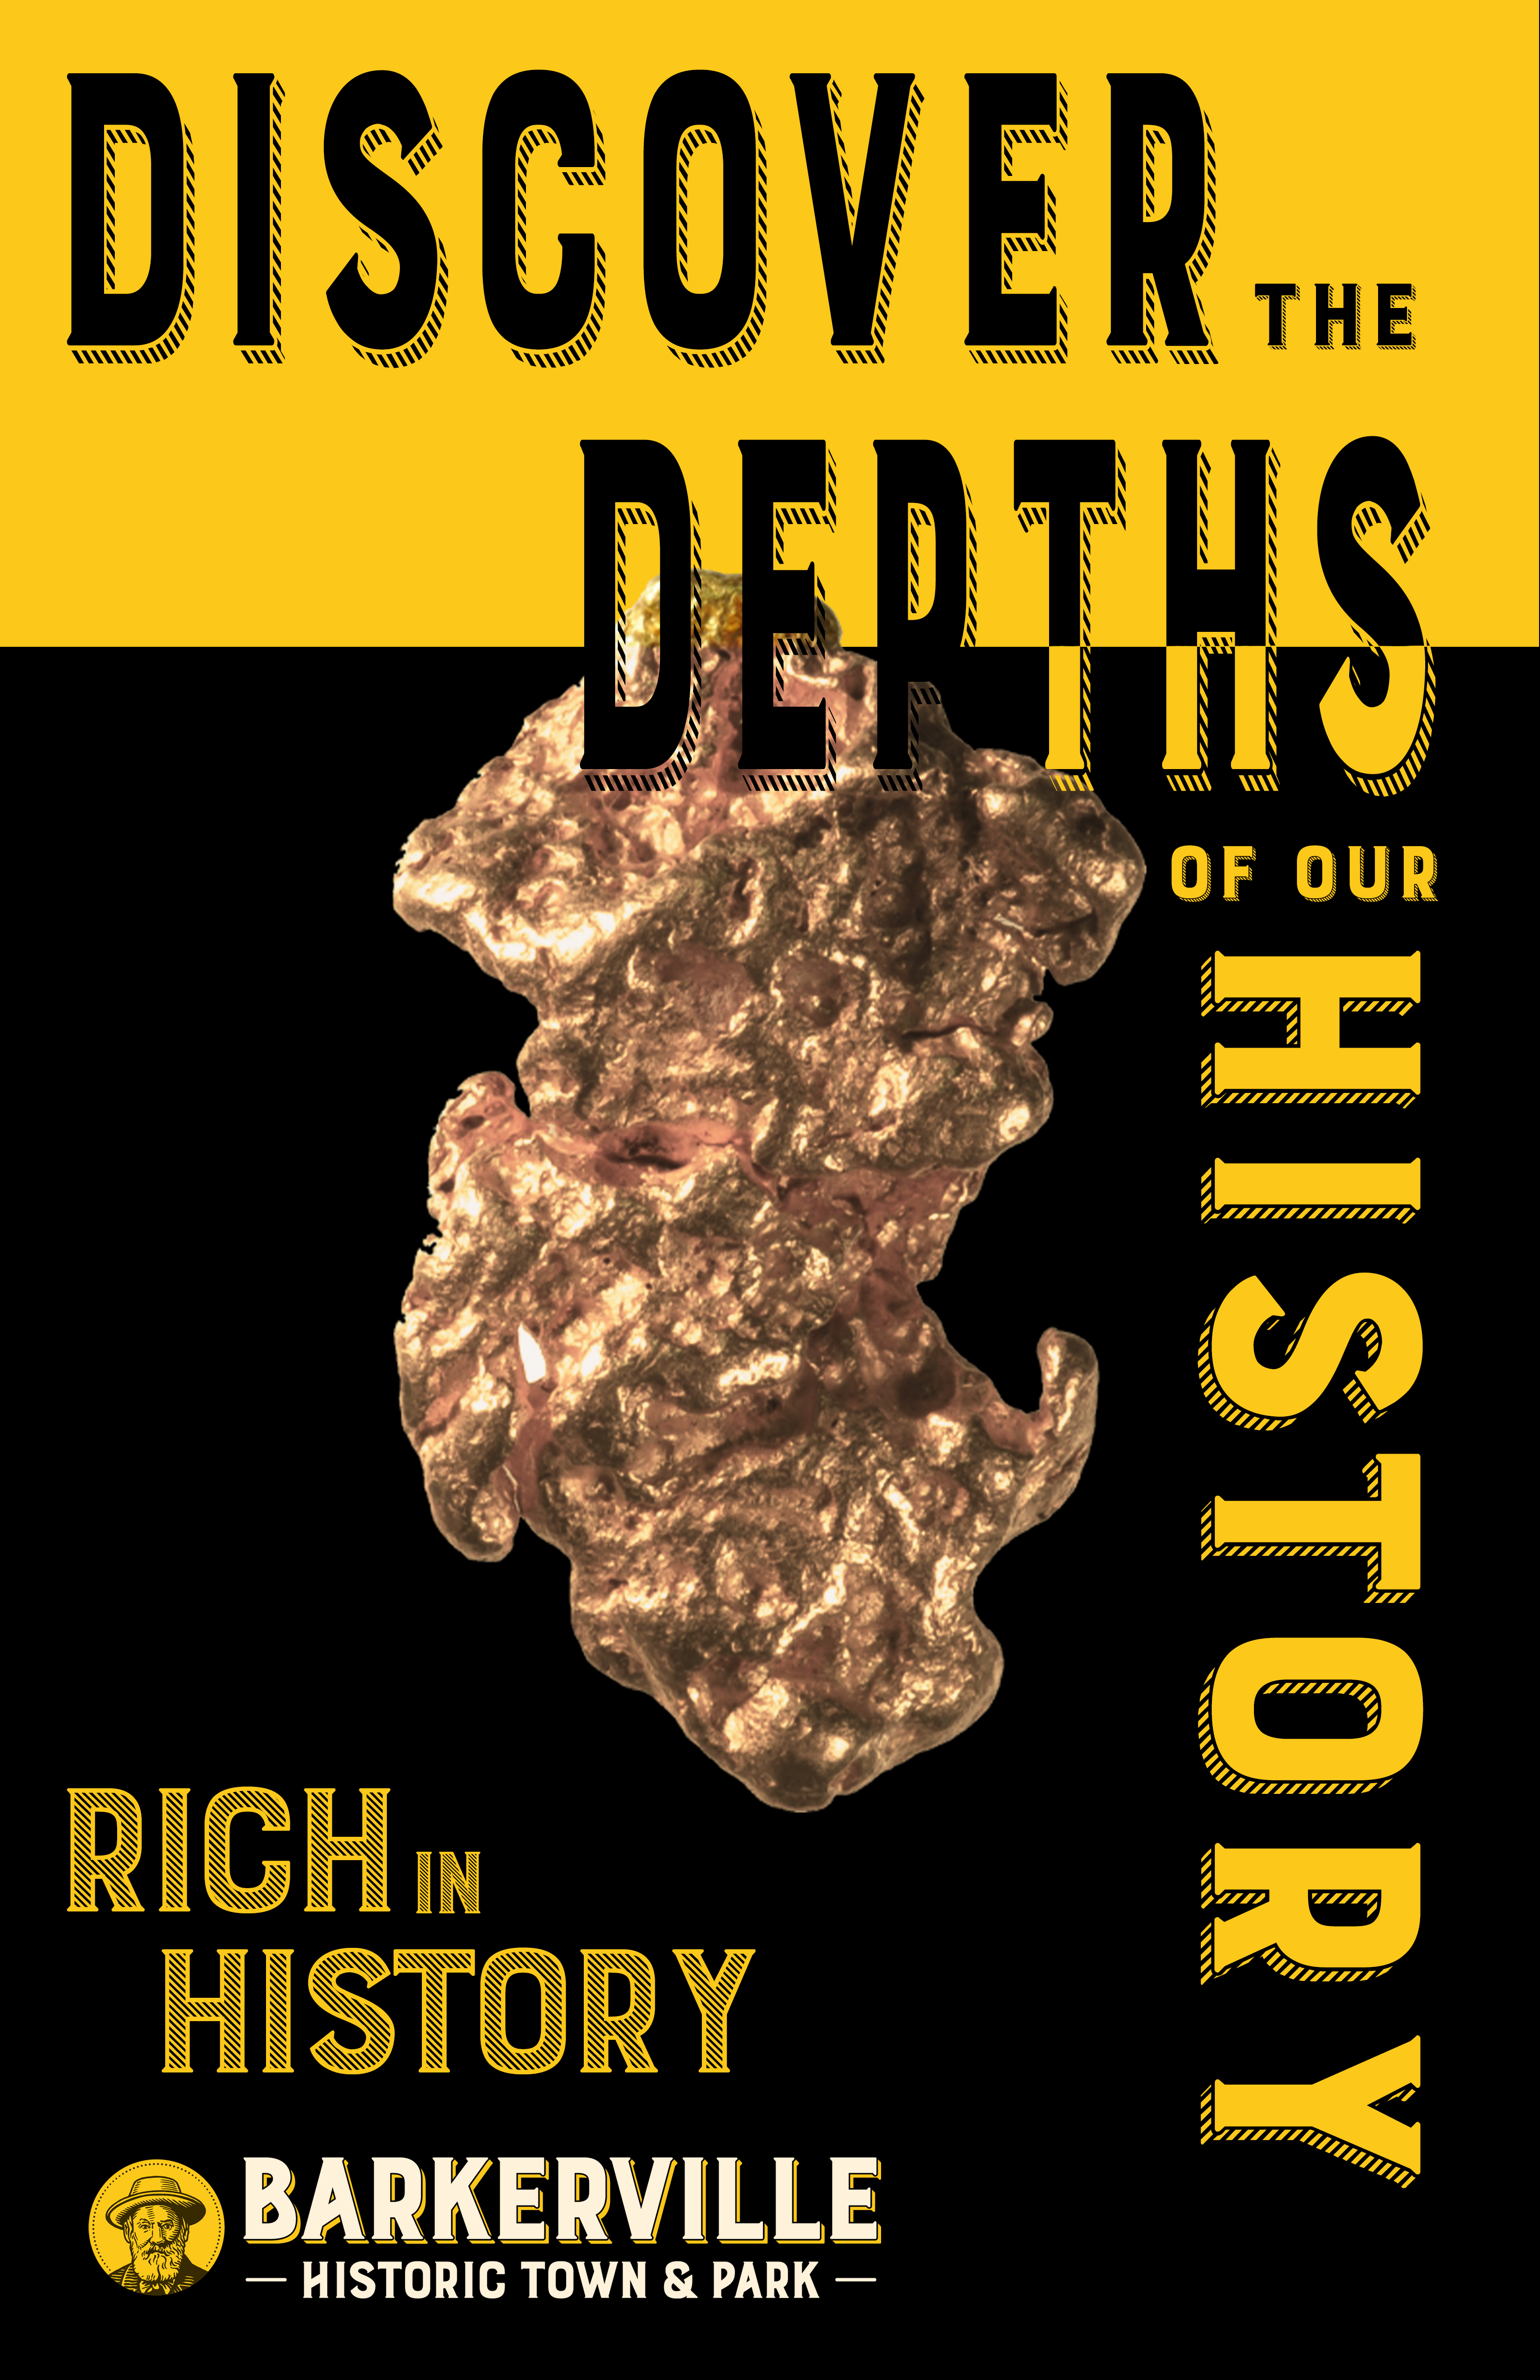 Rich in History Poster